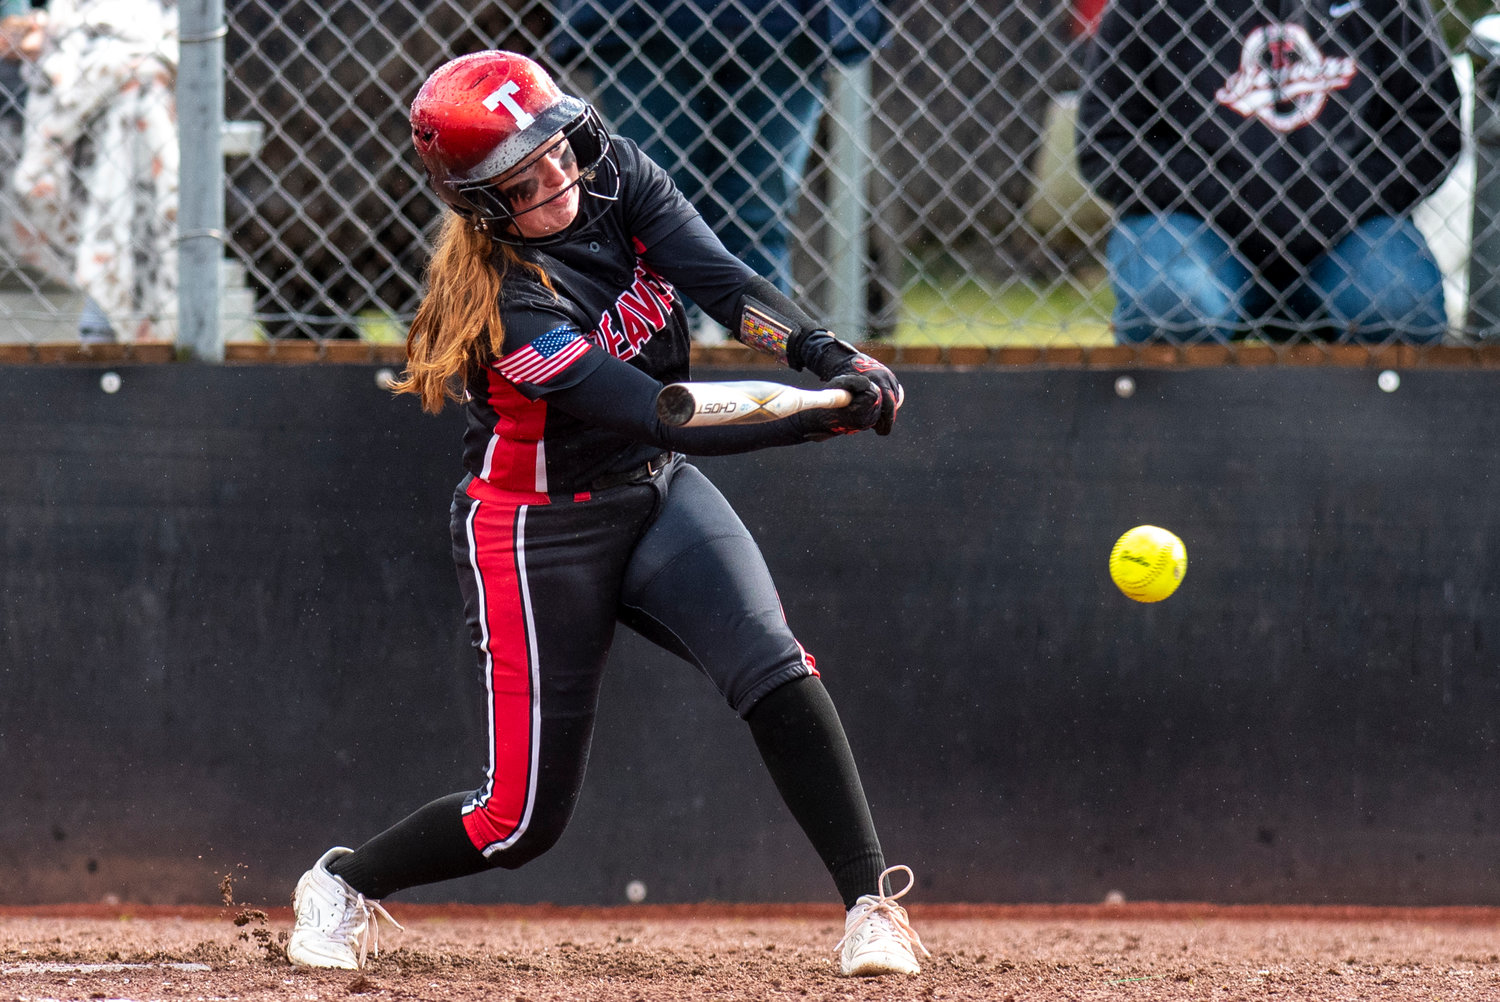 Tenino senior Abby Severse connects on an Elma pitch during a home game on April 22.